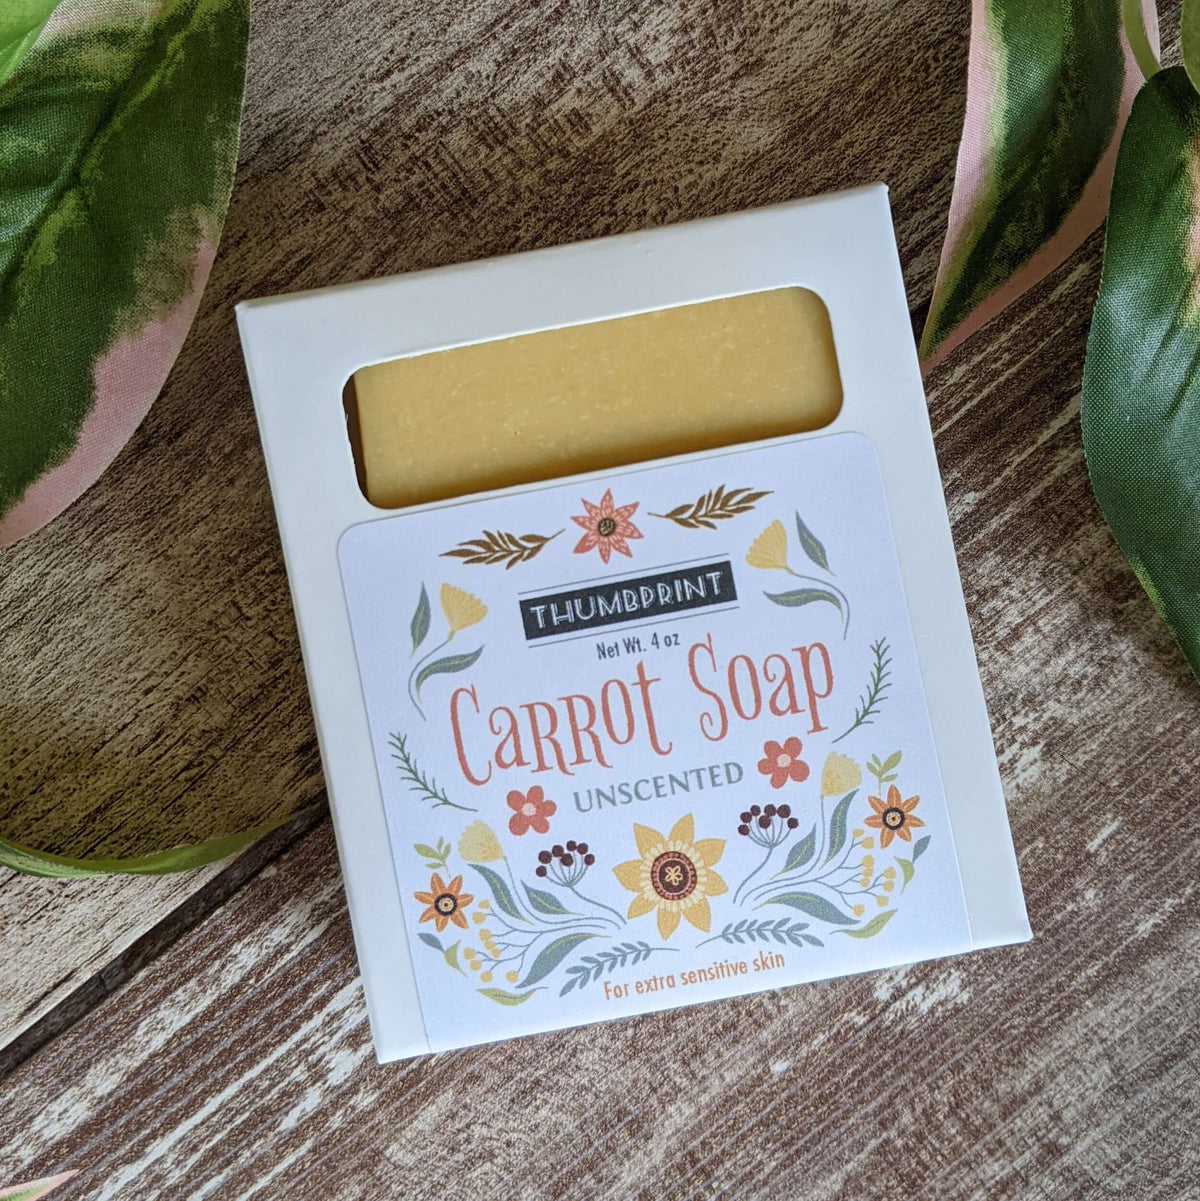 Carrot Natural Soap Bar - Unscented Soap for Sensitive Skin - Right Soap